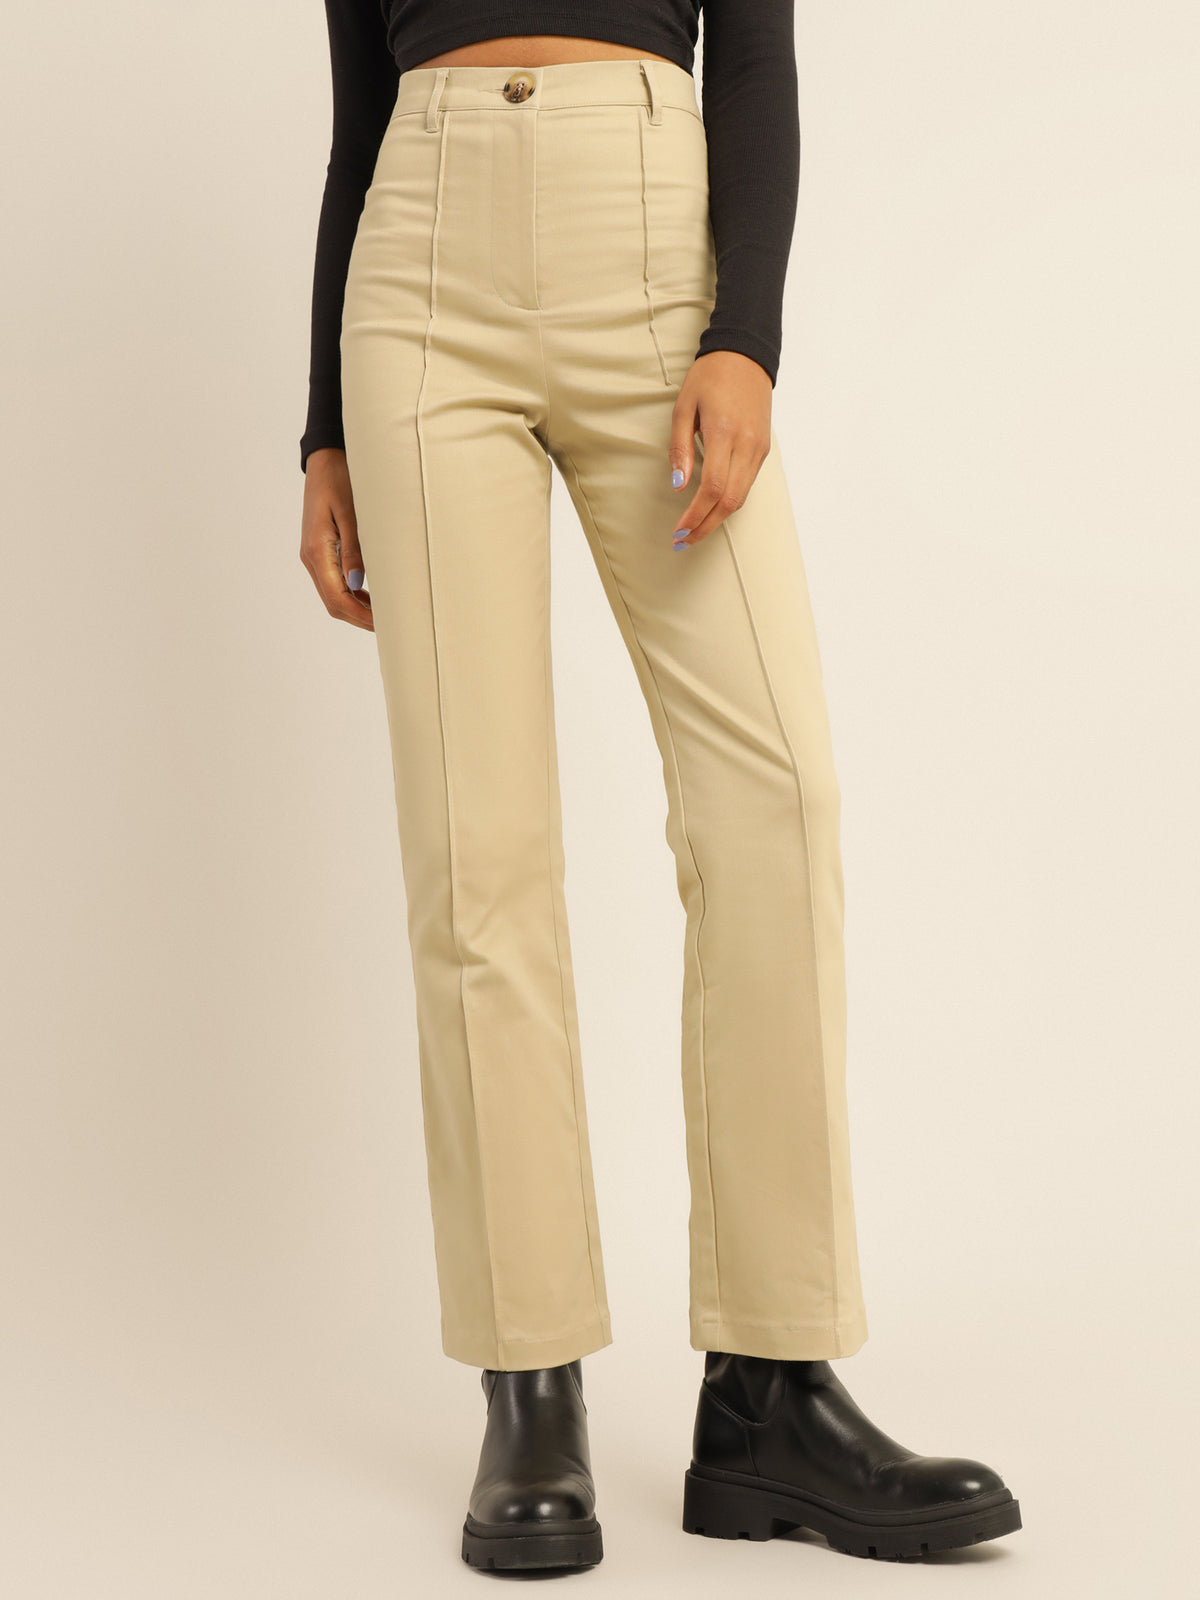 Lana Stretch Pants in Taupe